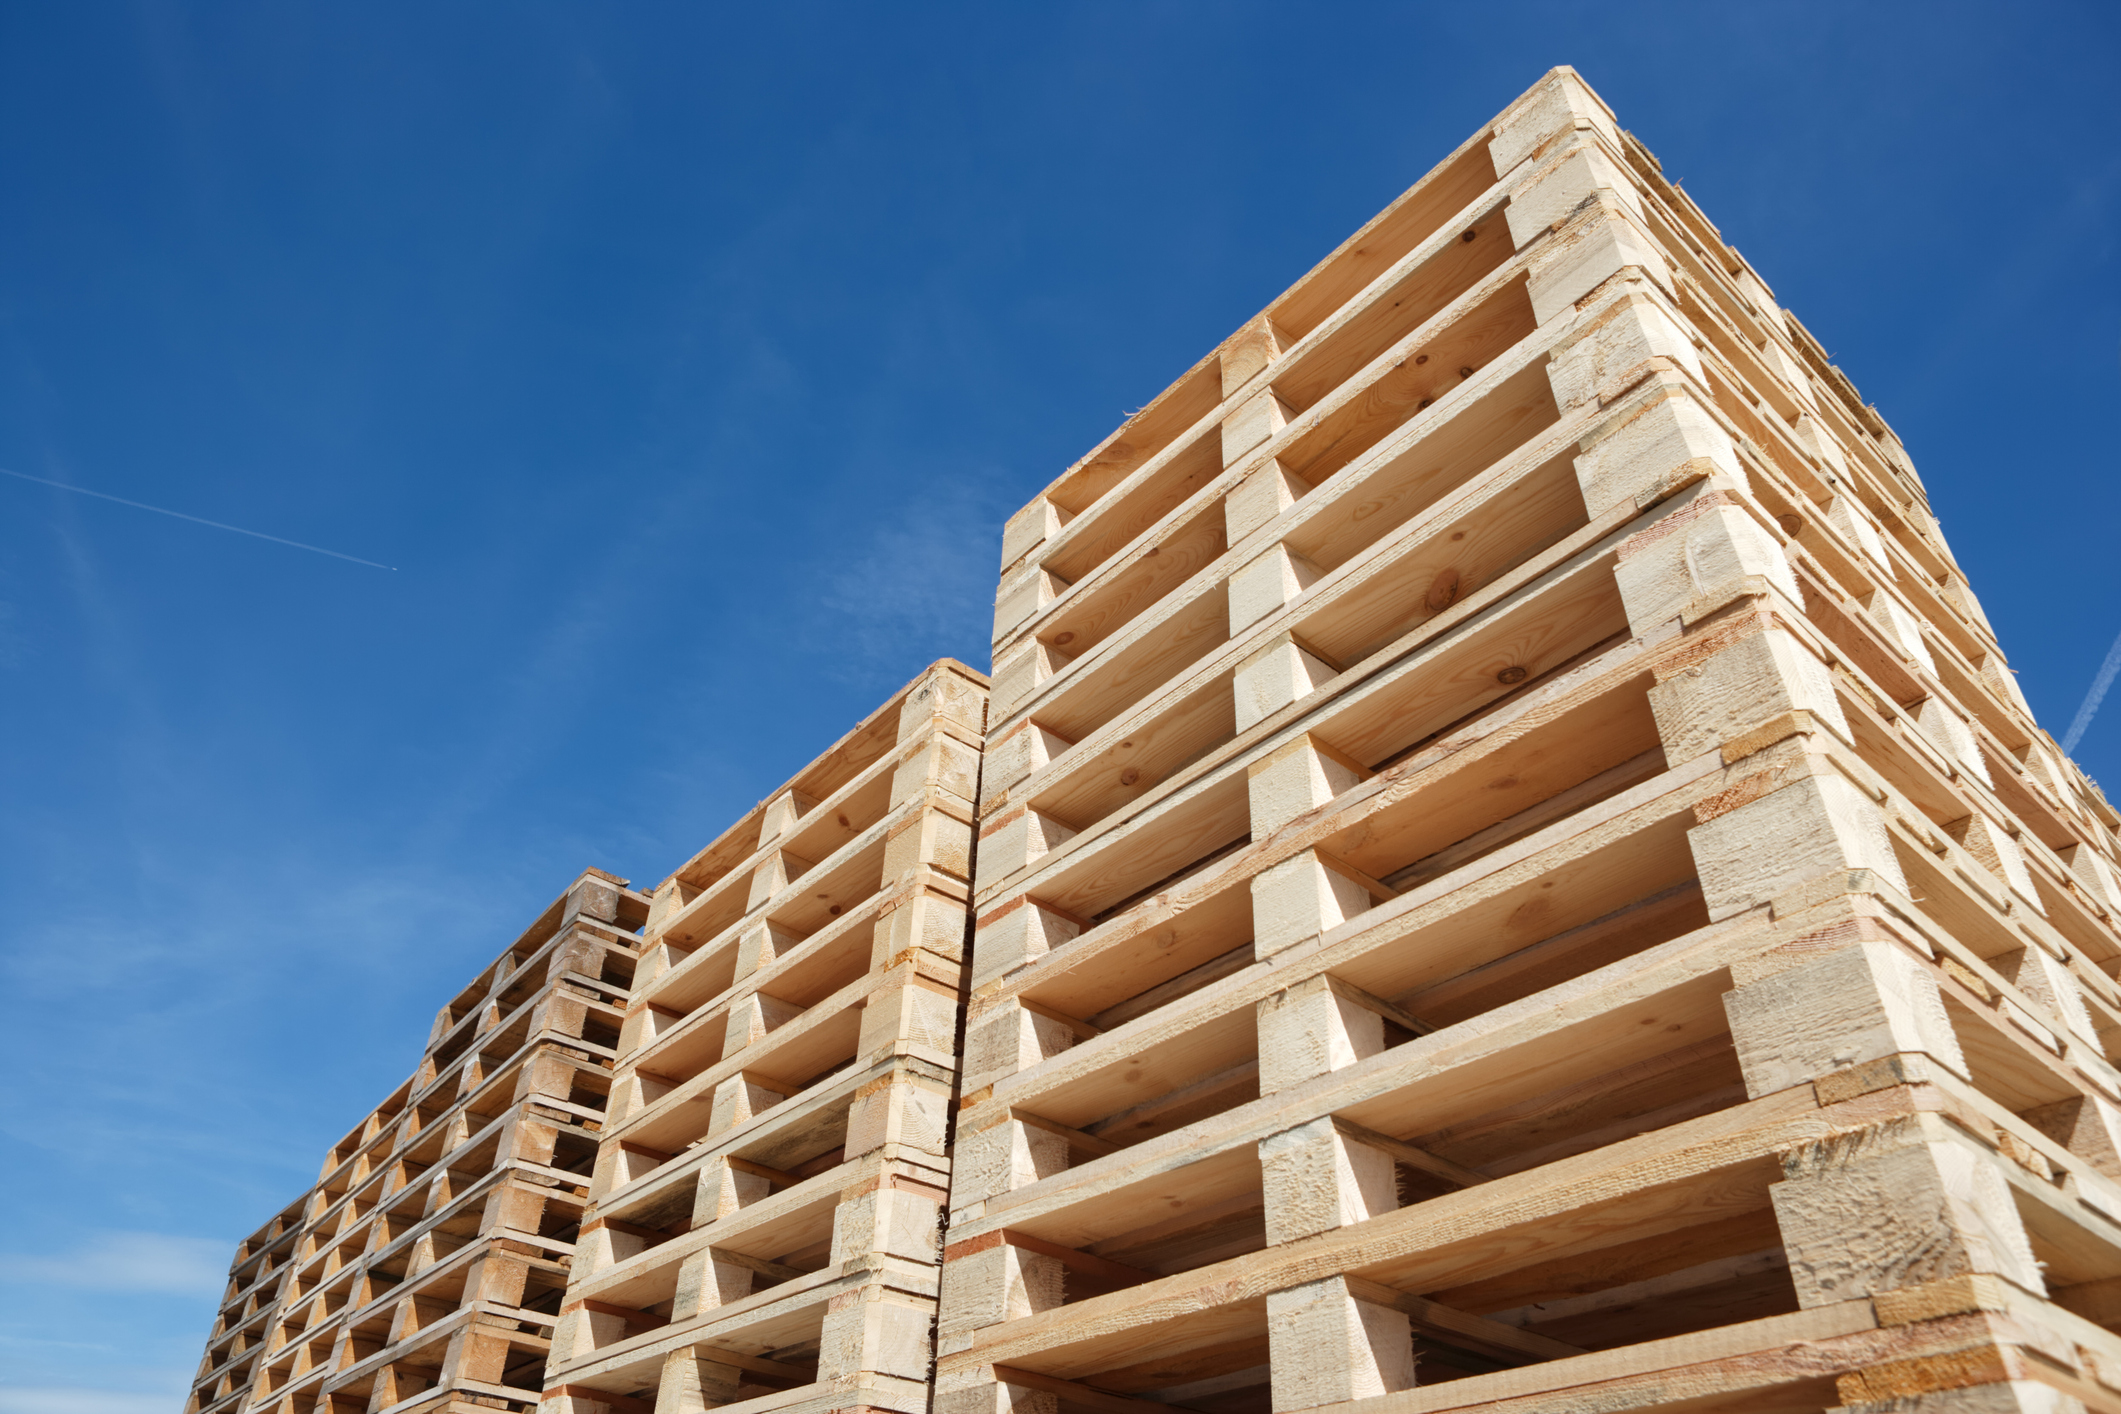 stack of wooden pallets against clear blue sky, low angle view